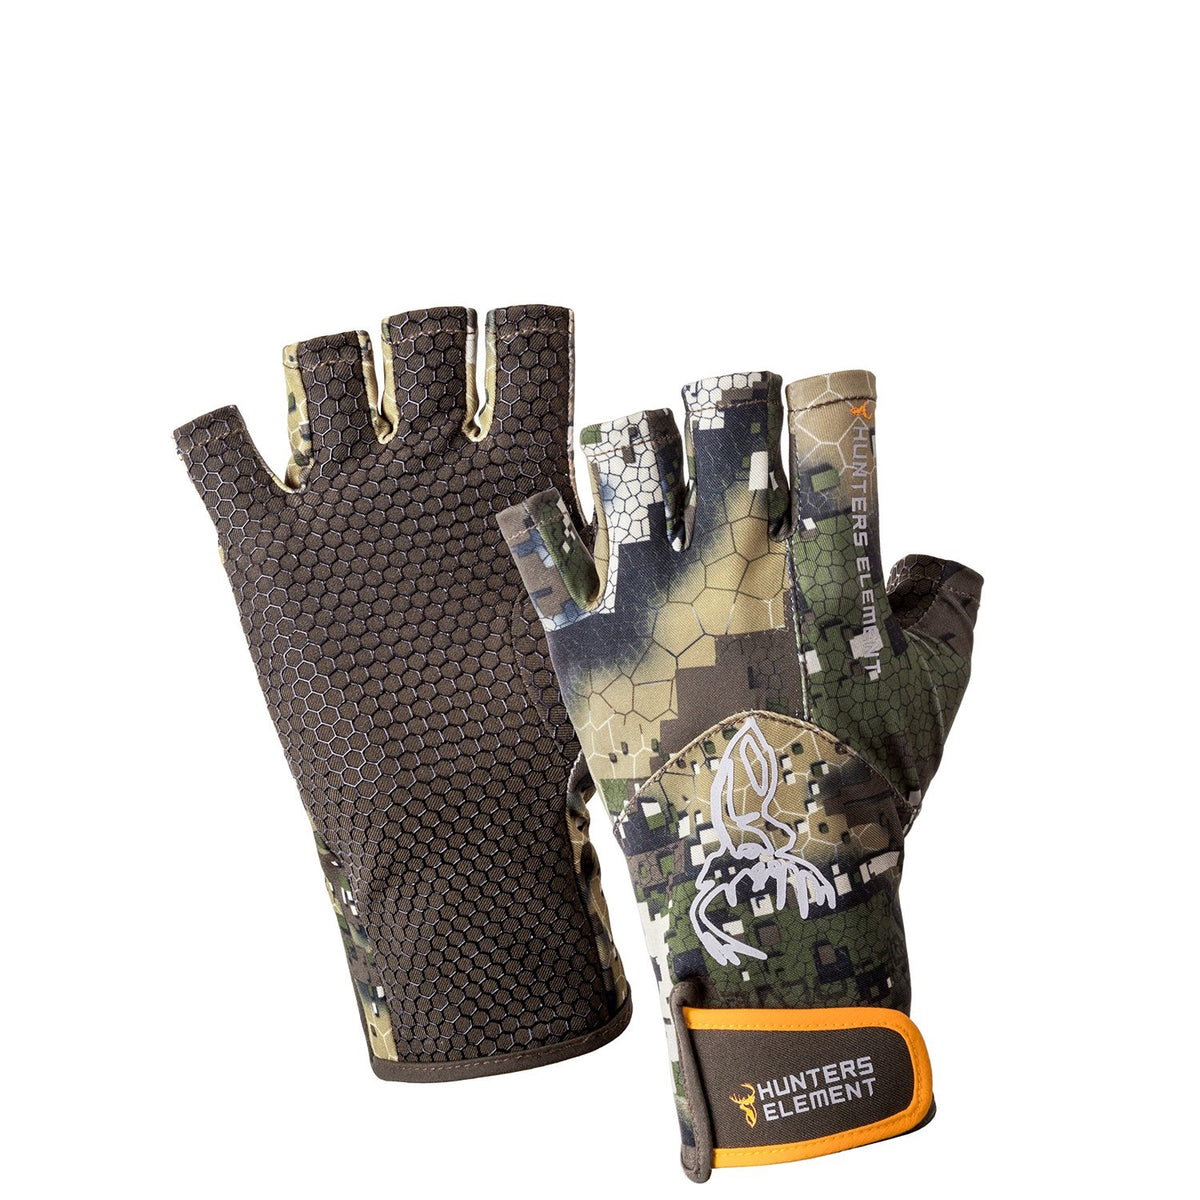 Pair of Hunters Element Crux Fingerless Gloves in Desolve Veil Camouflage